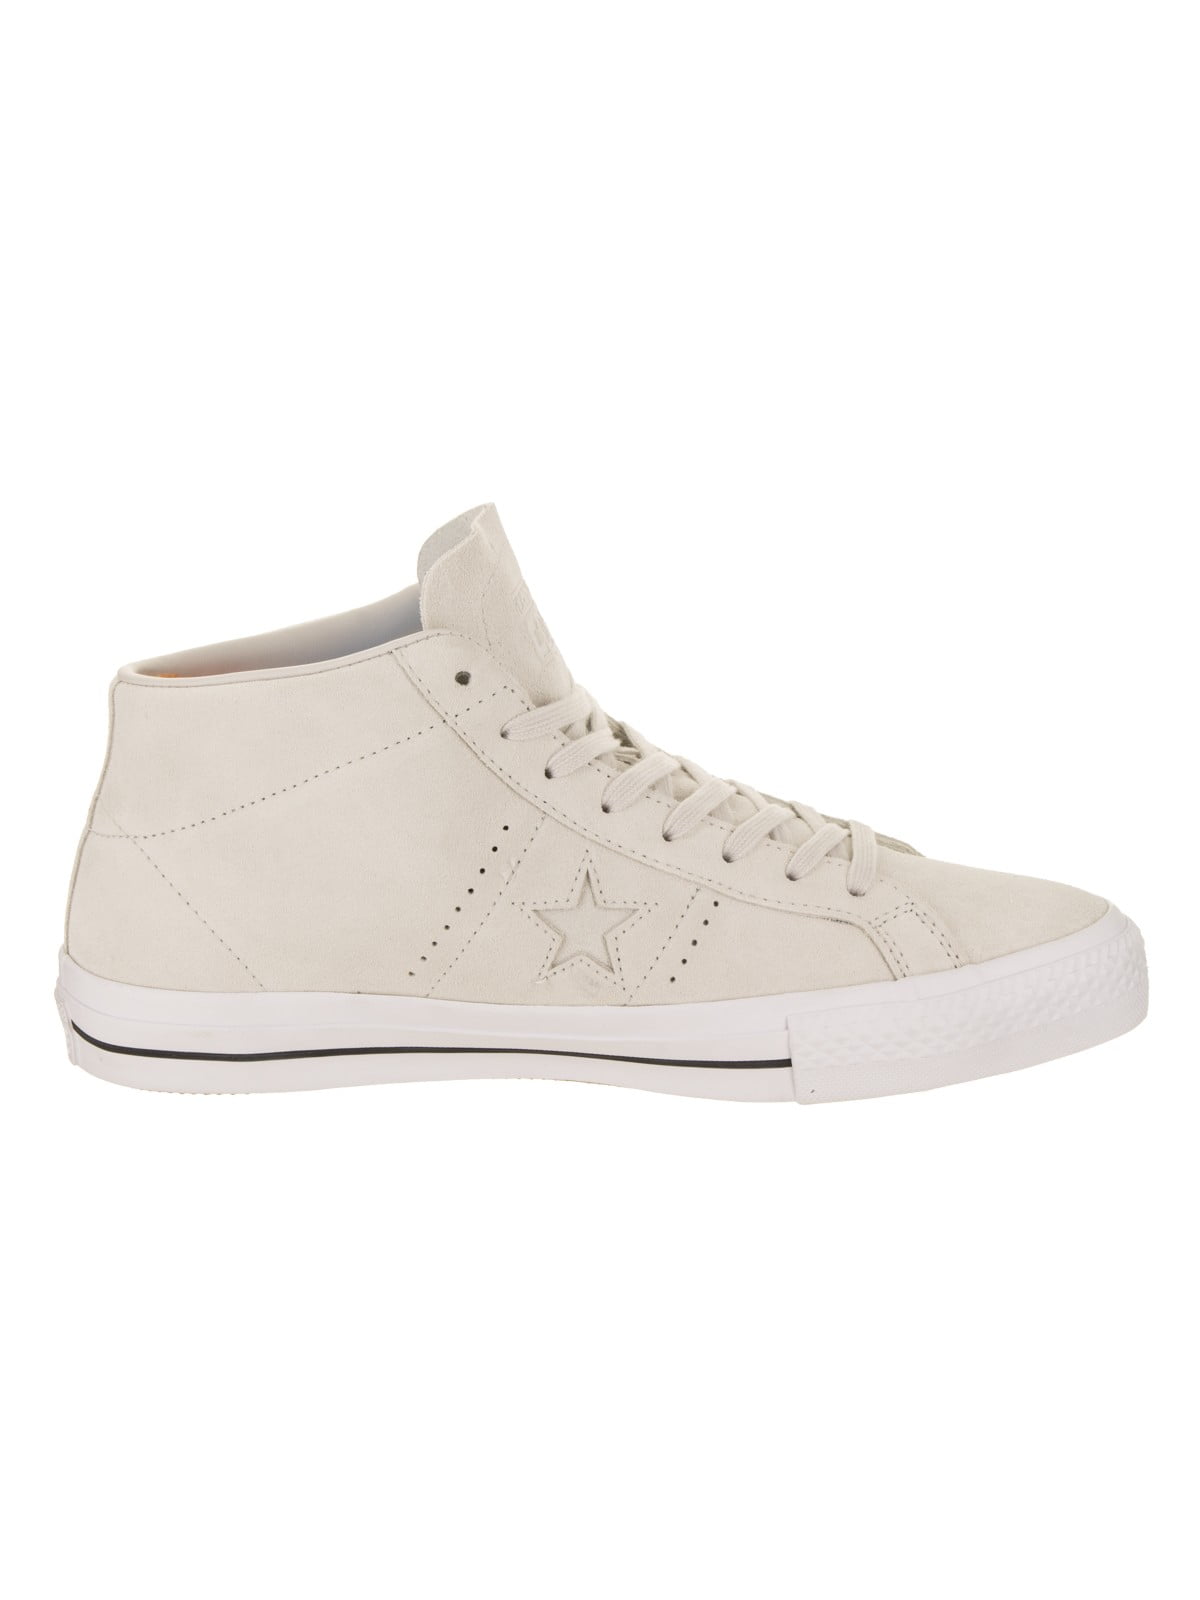 converse one star mid pro